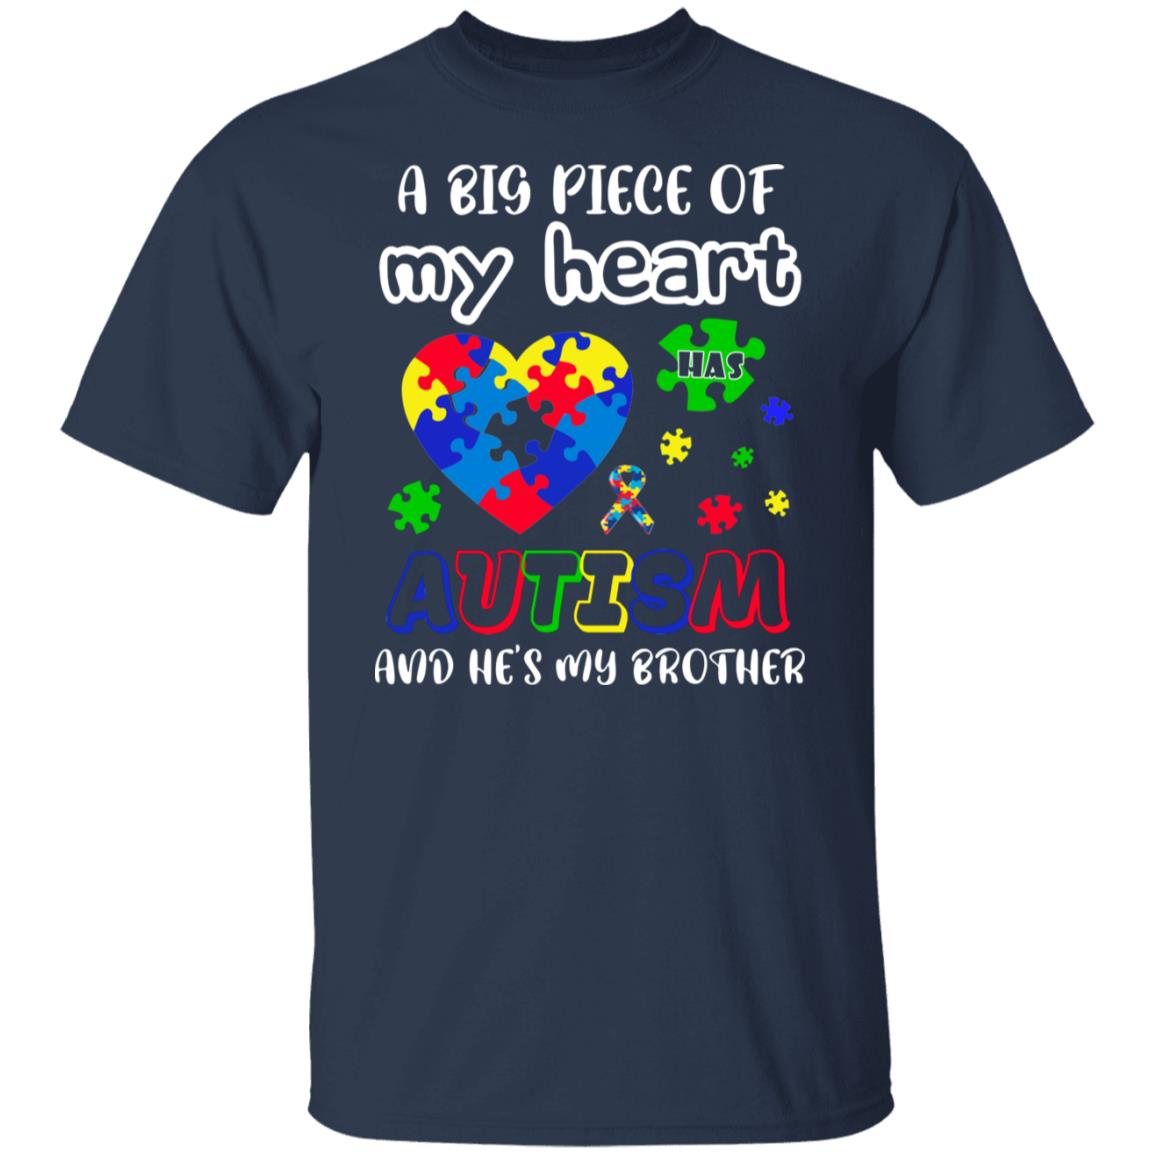 A Big Piece of My Heart Has Autism and He is my Brother Shirt